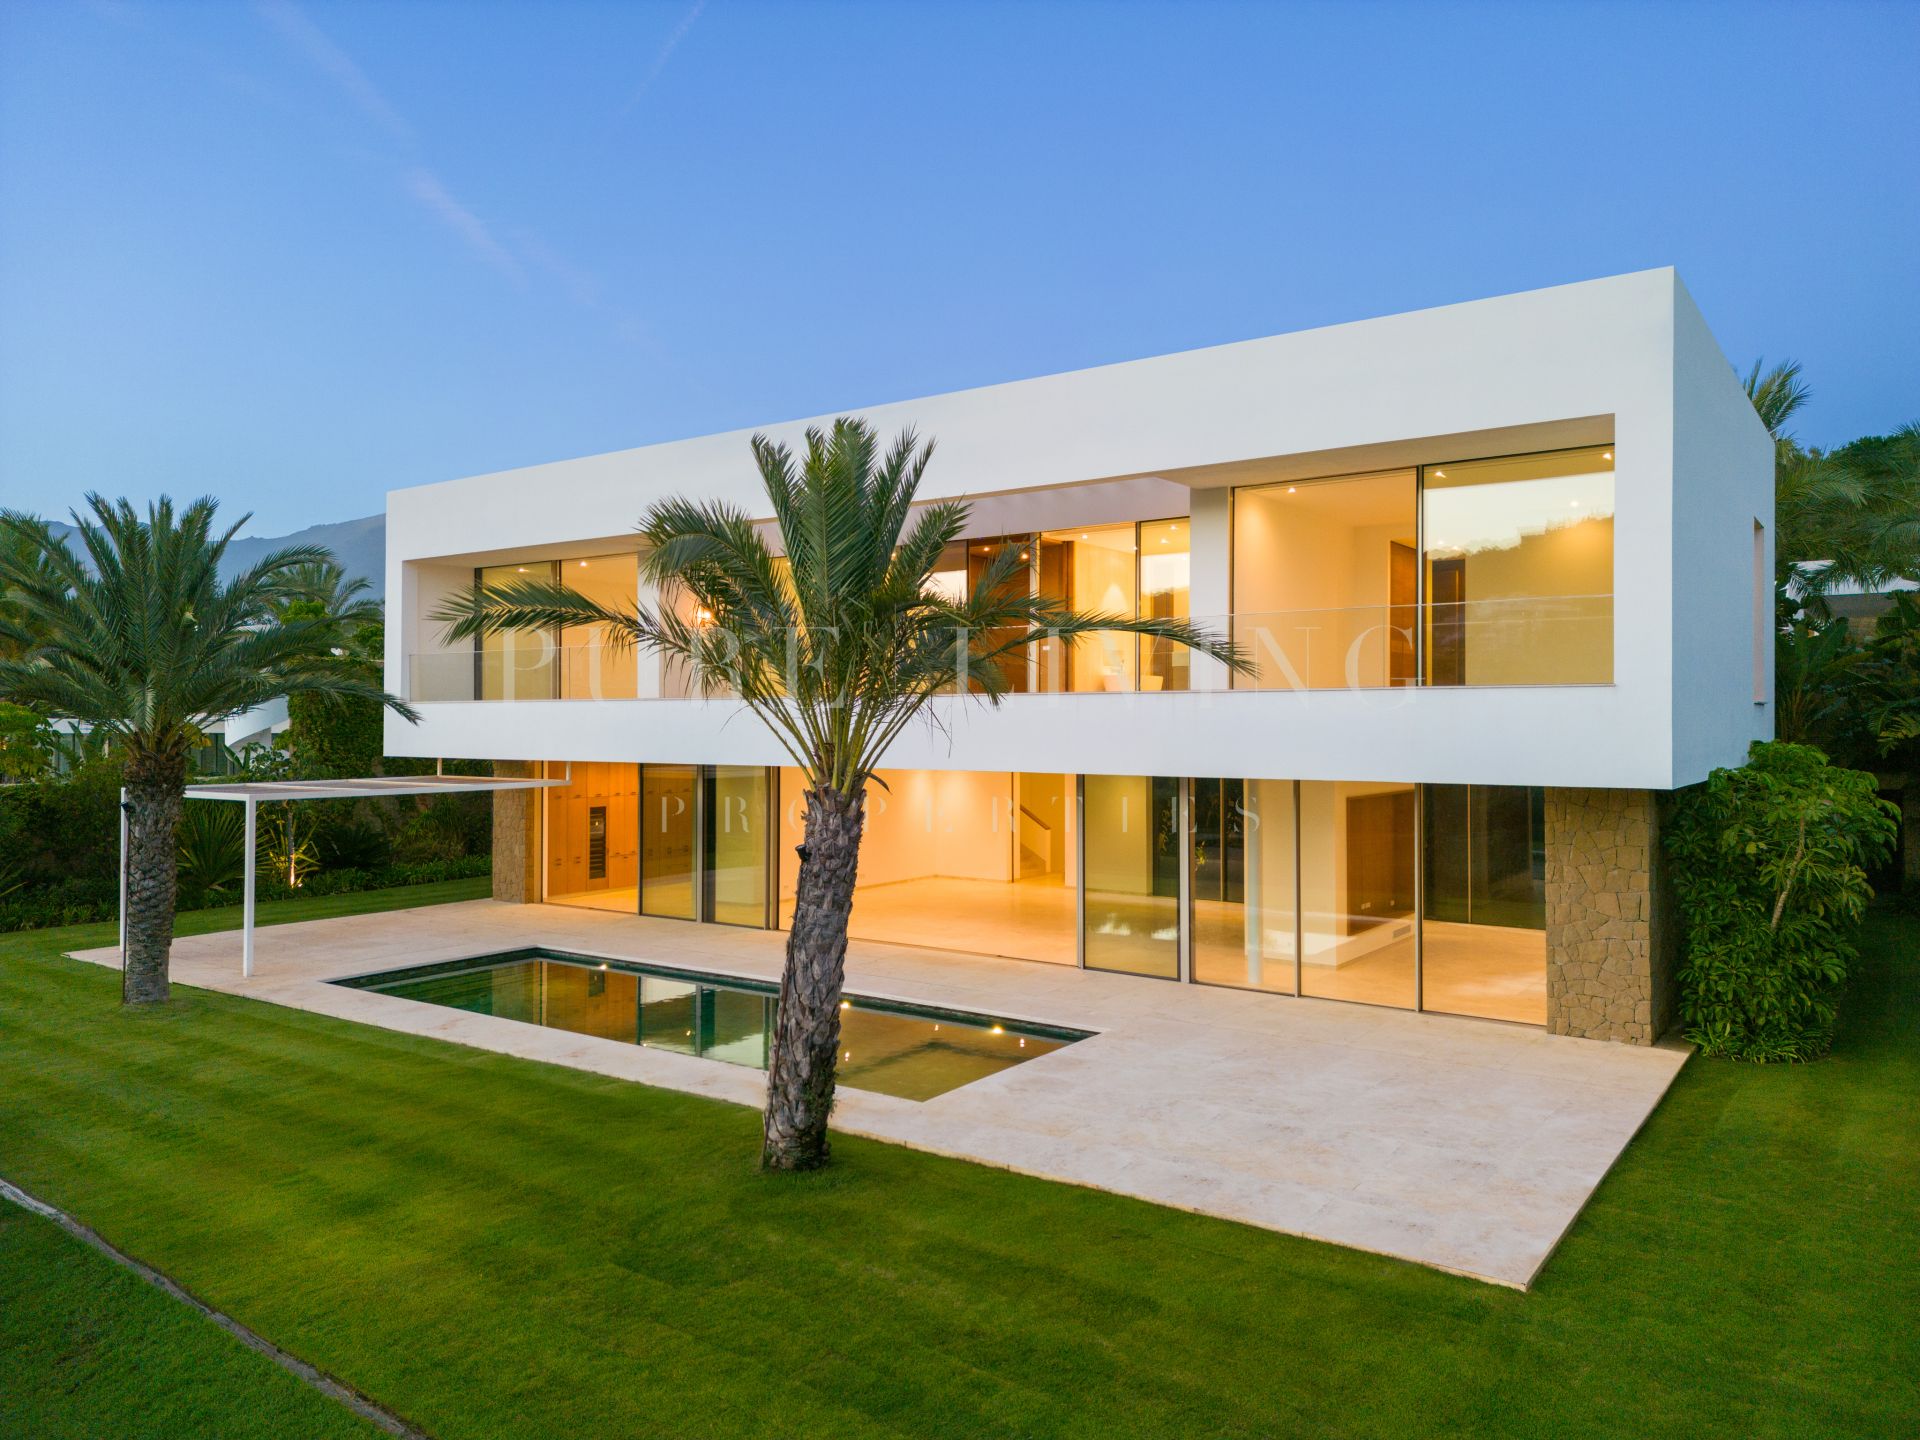 Sublime contemporary Five bedroom Project villa with magnificent views over golf course and the Mediterranean coast in Finca Cortesin, Casares.